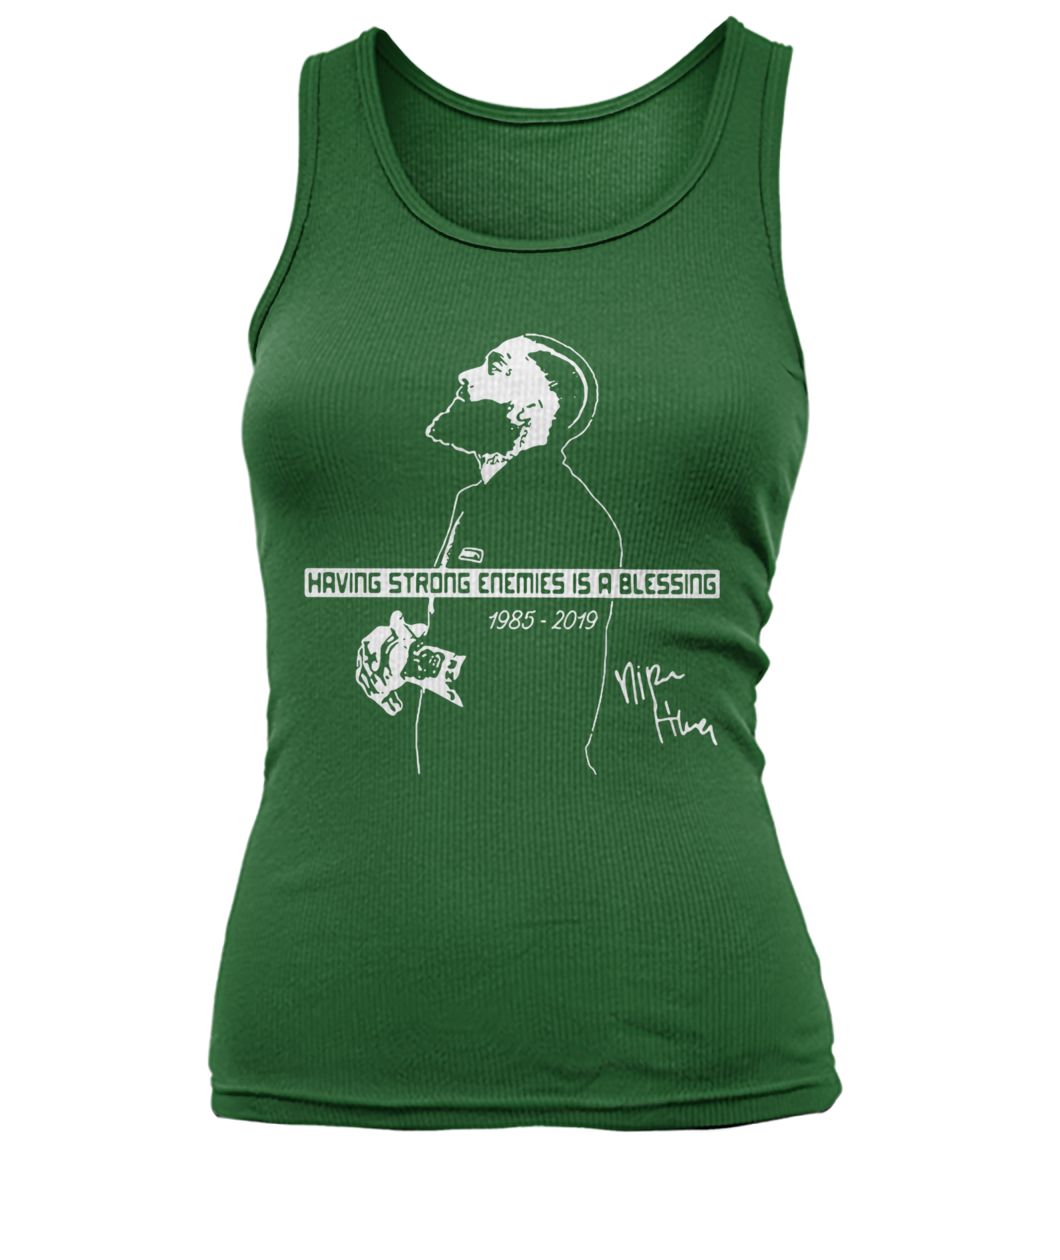 Nipsey Hussle having strong enemies is a blessing 1985 2019 women's tank top